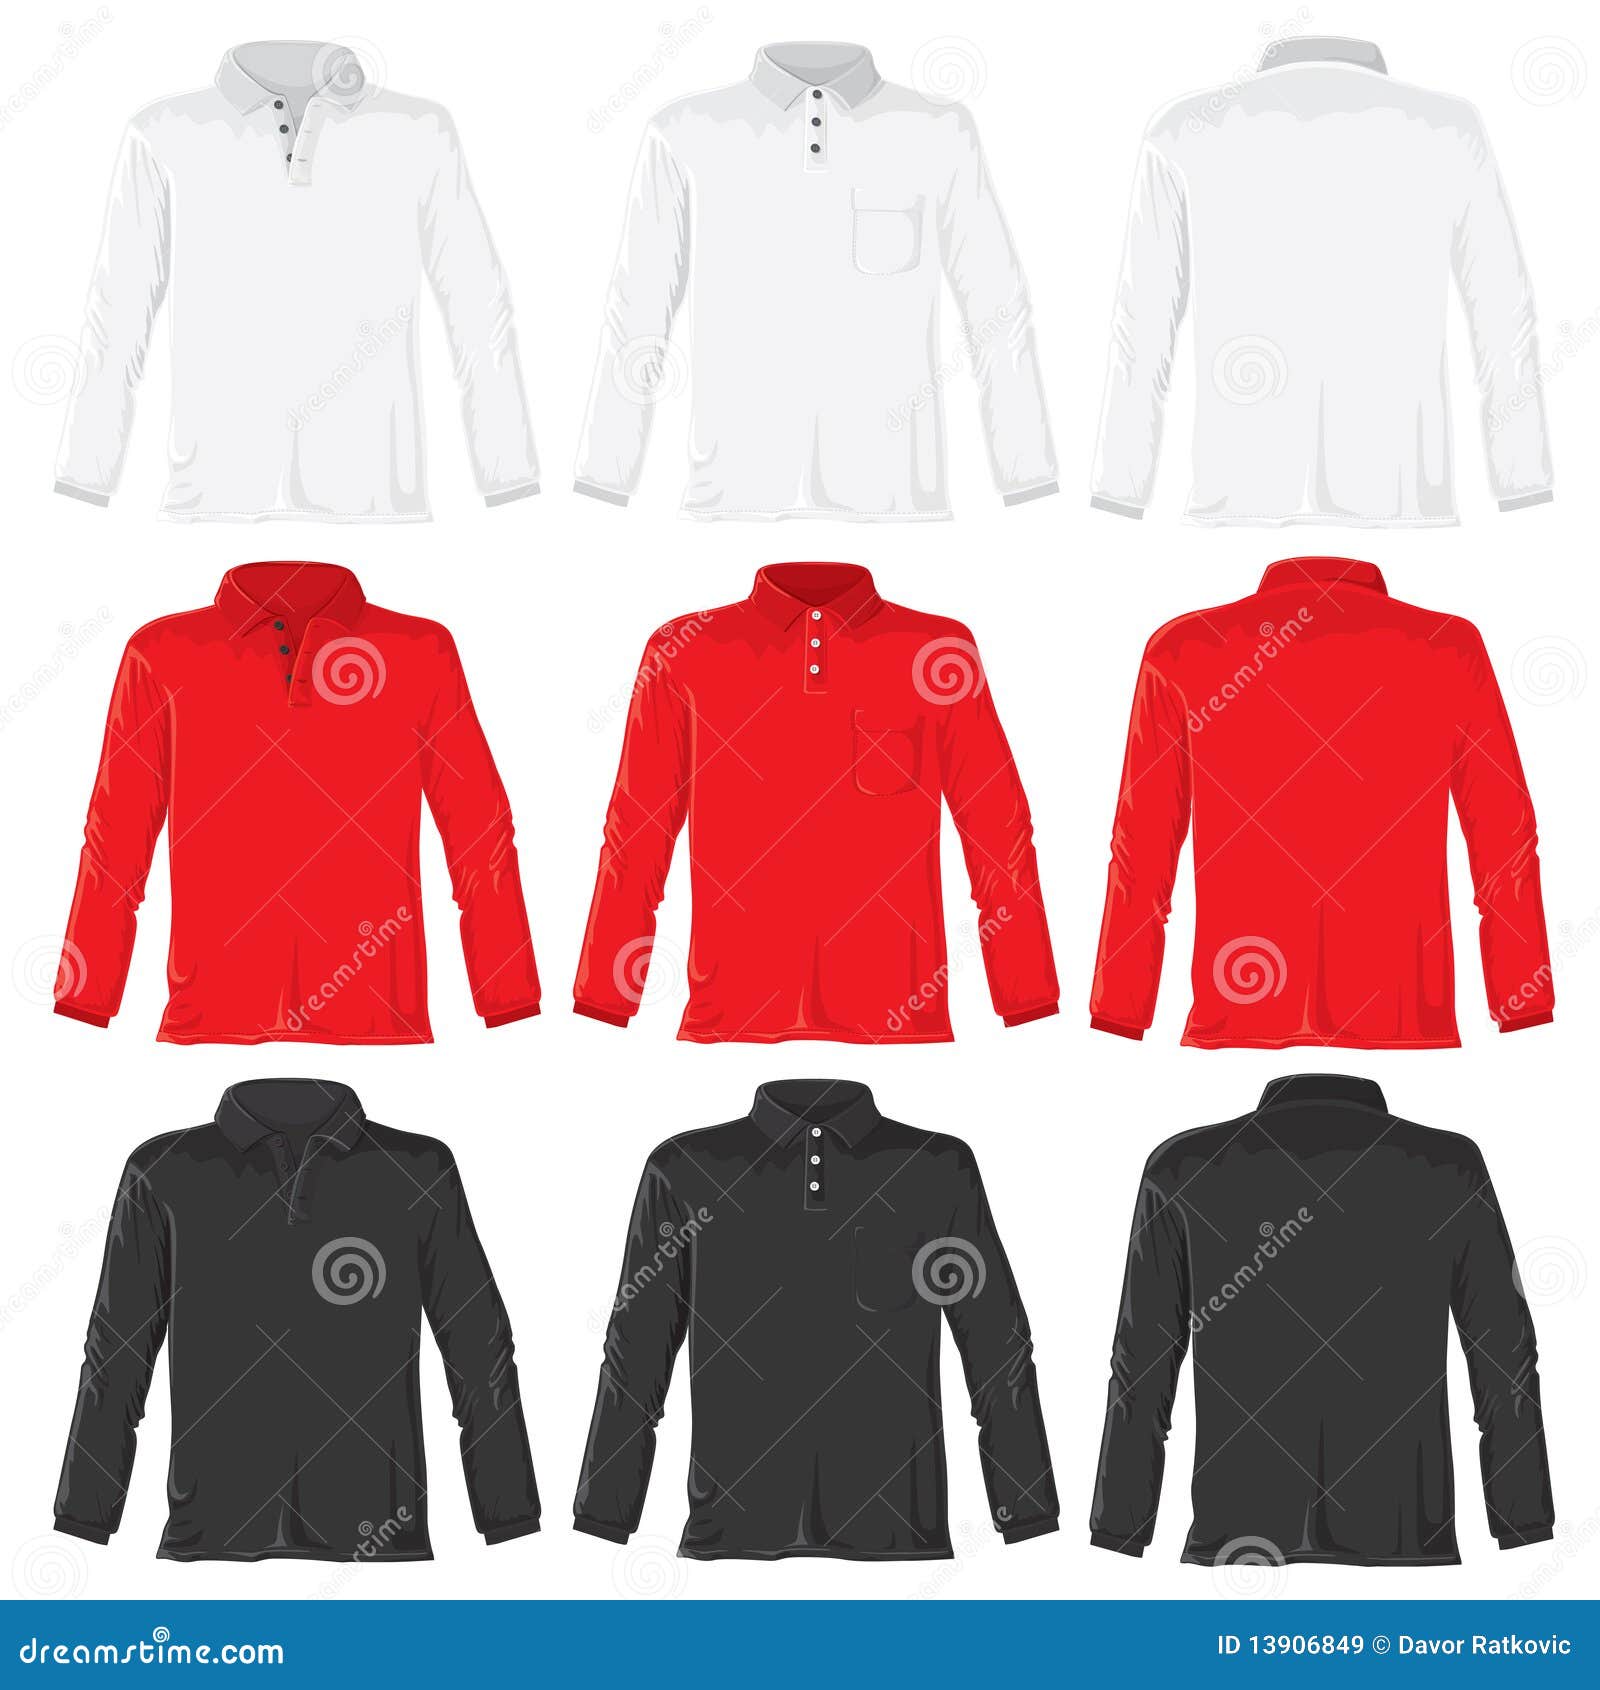 polo shirt with long sleeves